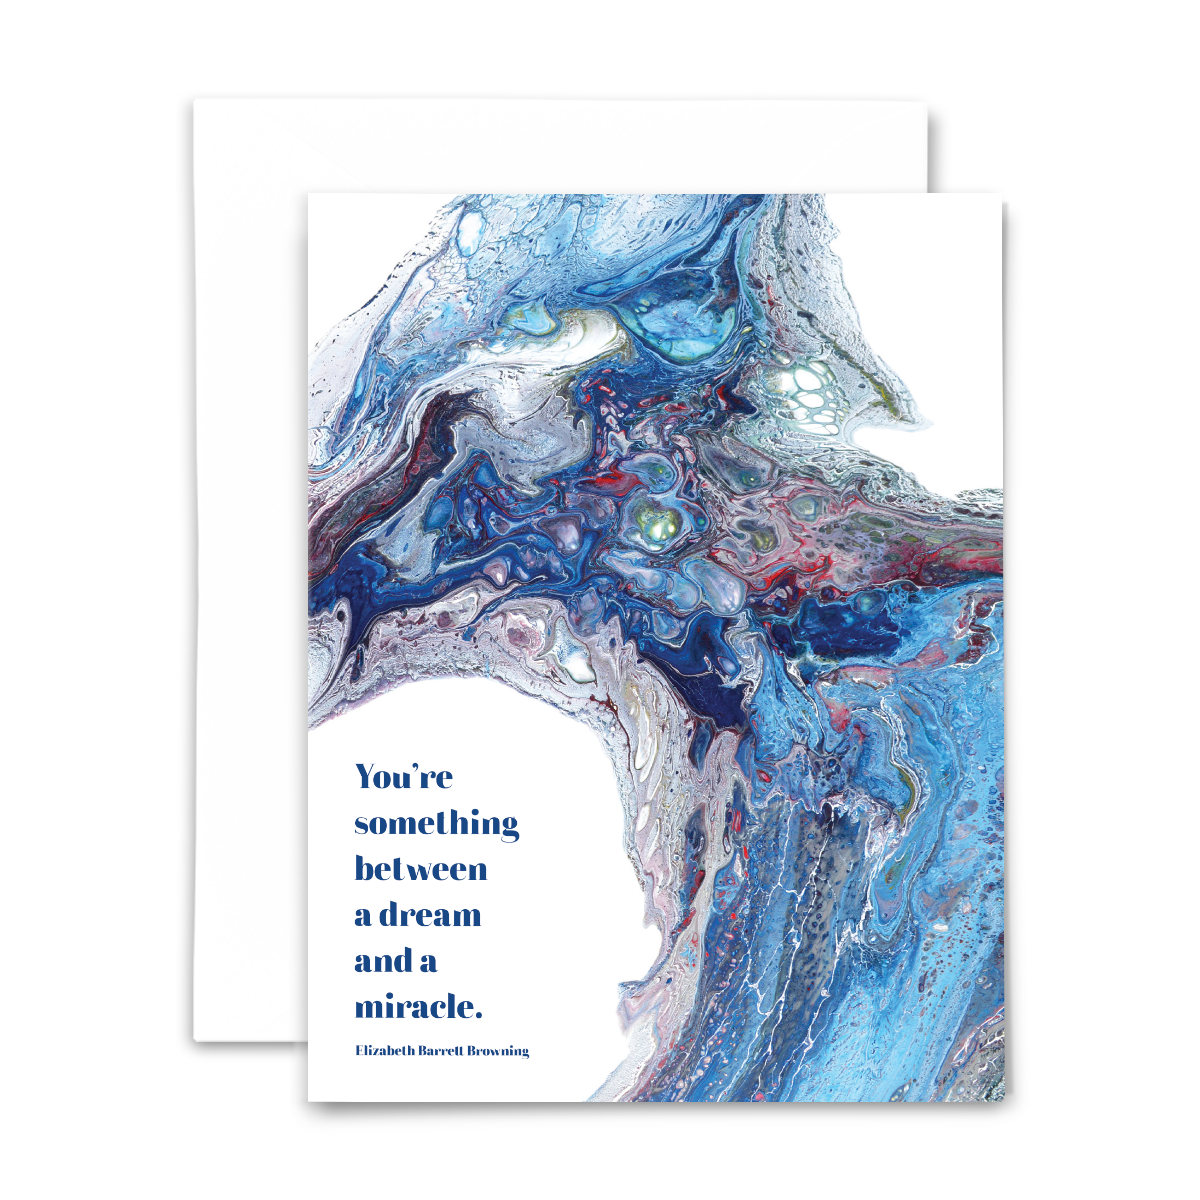 A2 folded blank greeting card with print of acrylic pour painting and quote "You're something between a dream and a miracle." (Elizabeth Barrett Browning) Color profile: blues, green, purples; with white envelope.